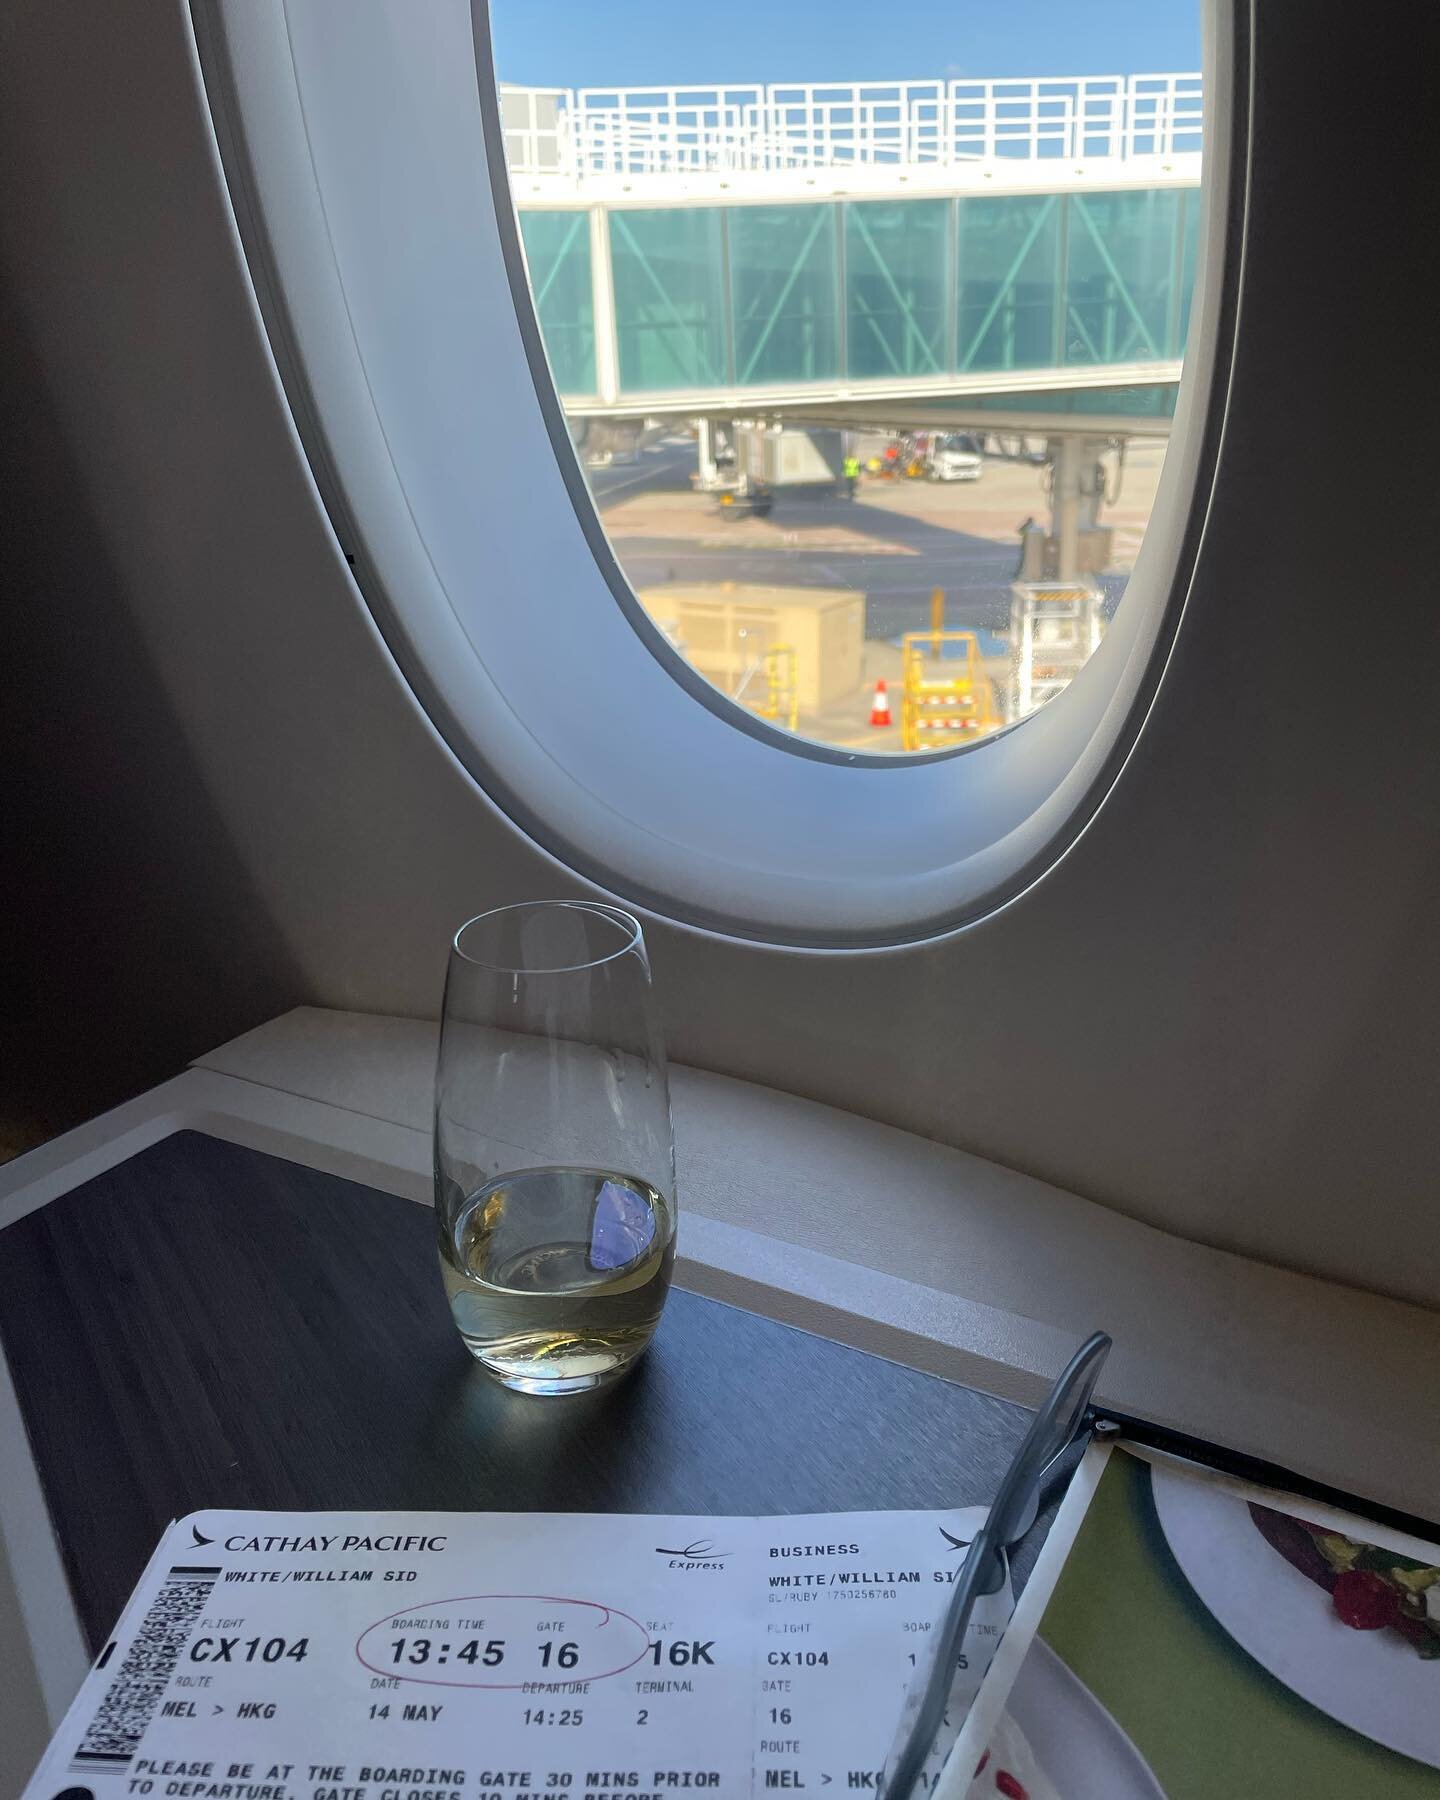 Next Stop - Kyoto, Japan. 
We are so excited to be embarking on our first International trip since we started our business, and looking forward to sharing our FF story to all the delegates at the IWTO 2023 Congress. 
❤️🐑 @international_wool